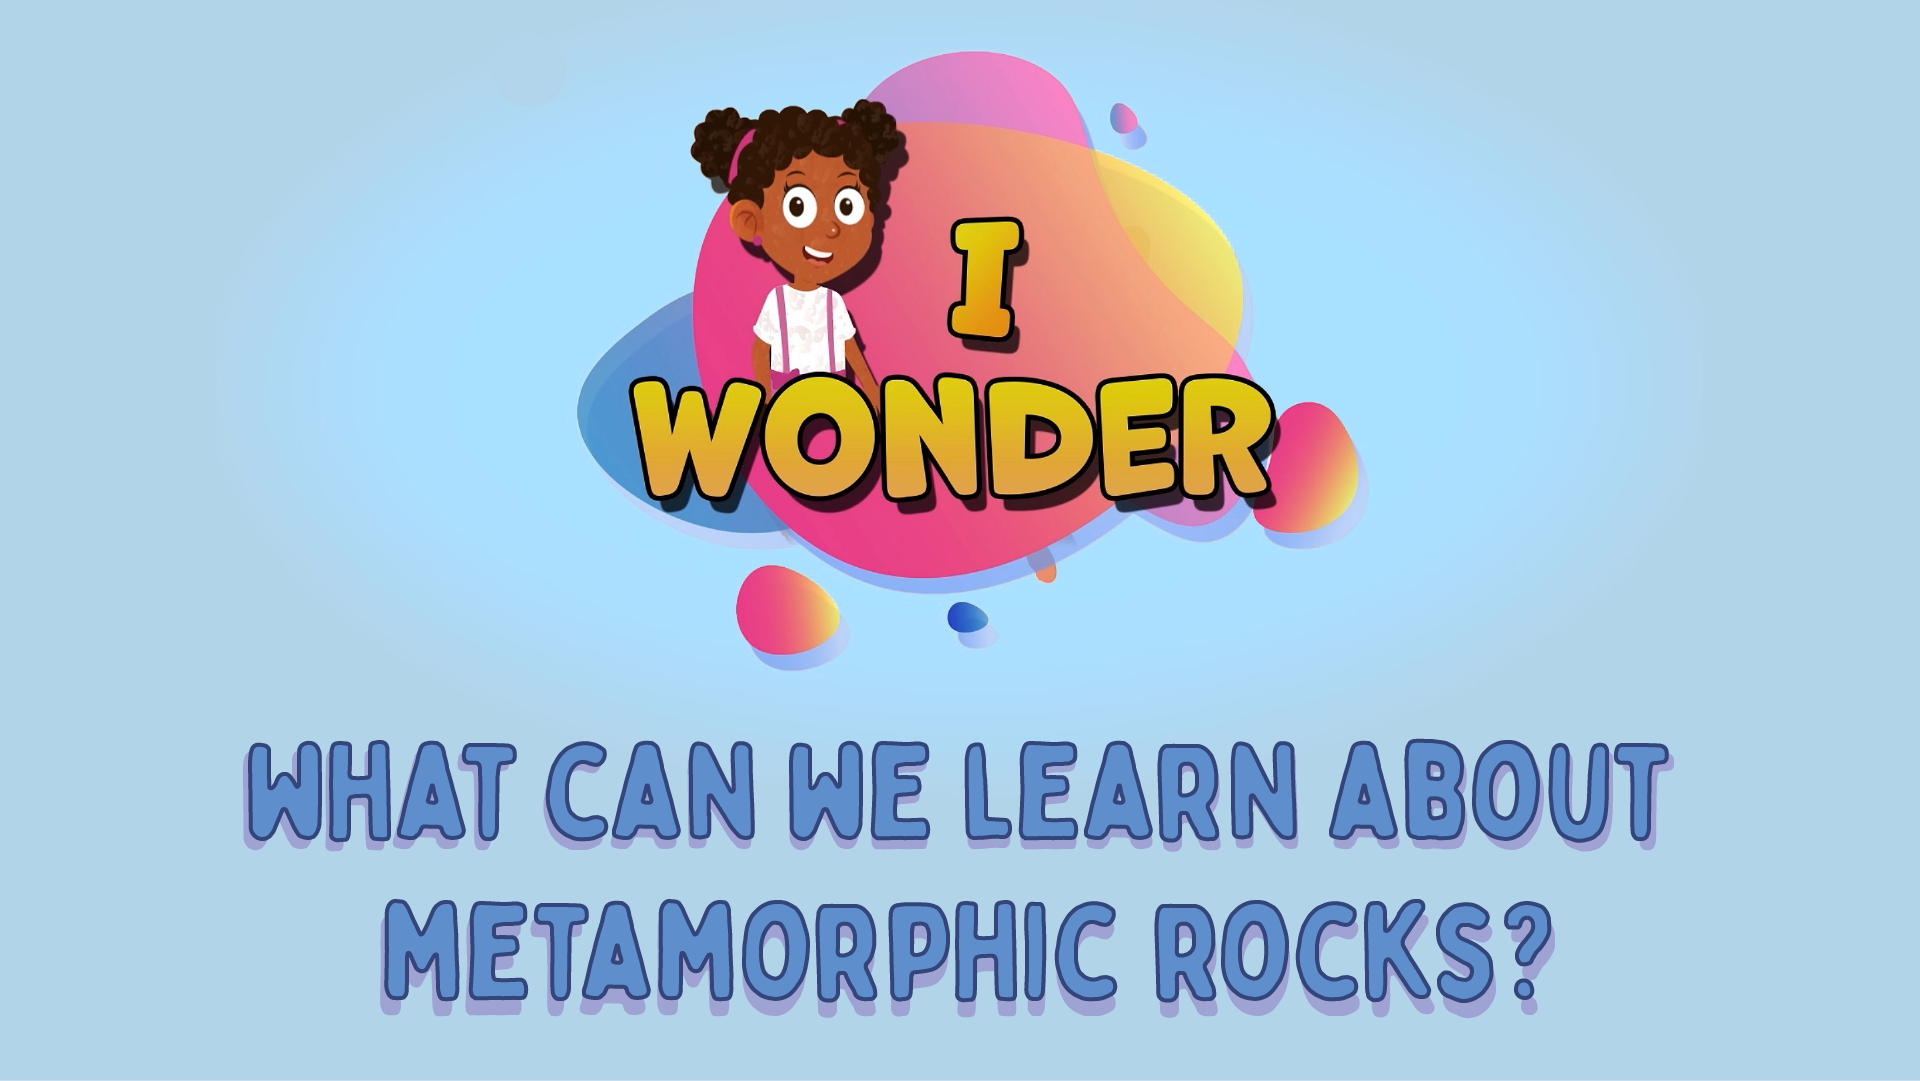 What Can We Learn About Metamorphic Rocks?